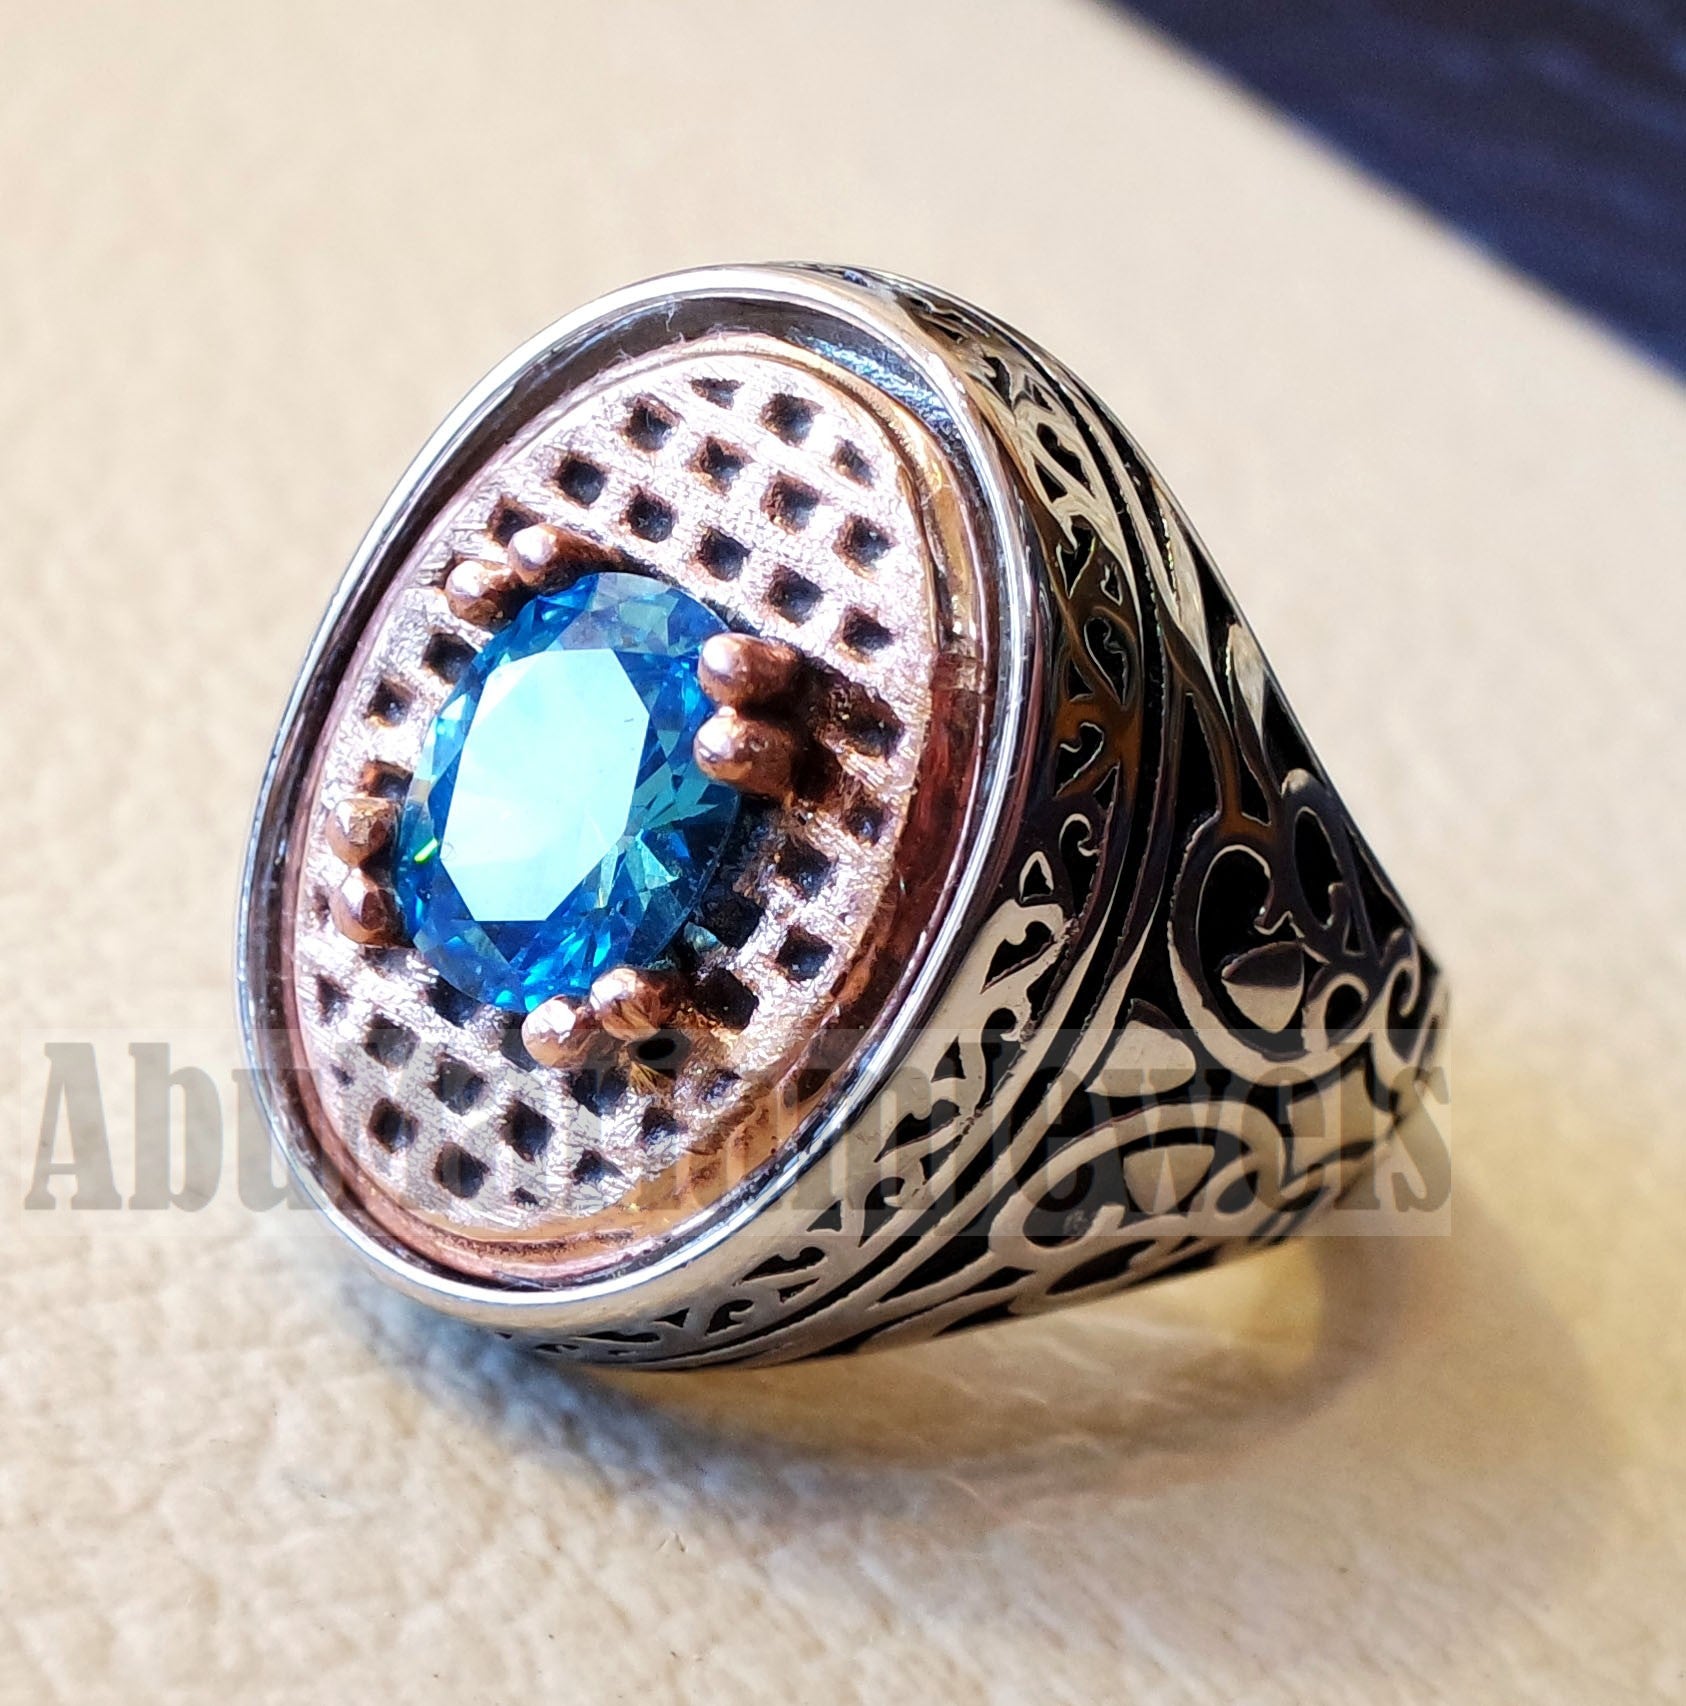 deep vivid sky blue cubic zirconia oval stone highest quality stone sterling silver 925 men ring and bronze frame all sizes jewelry